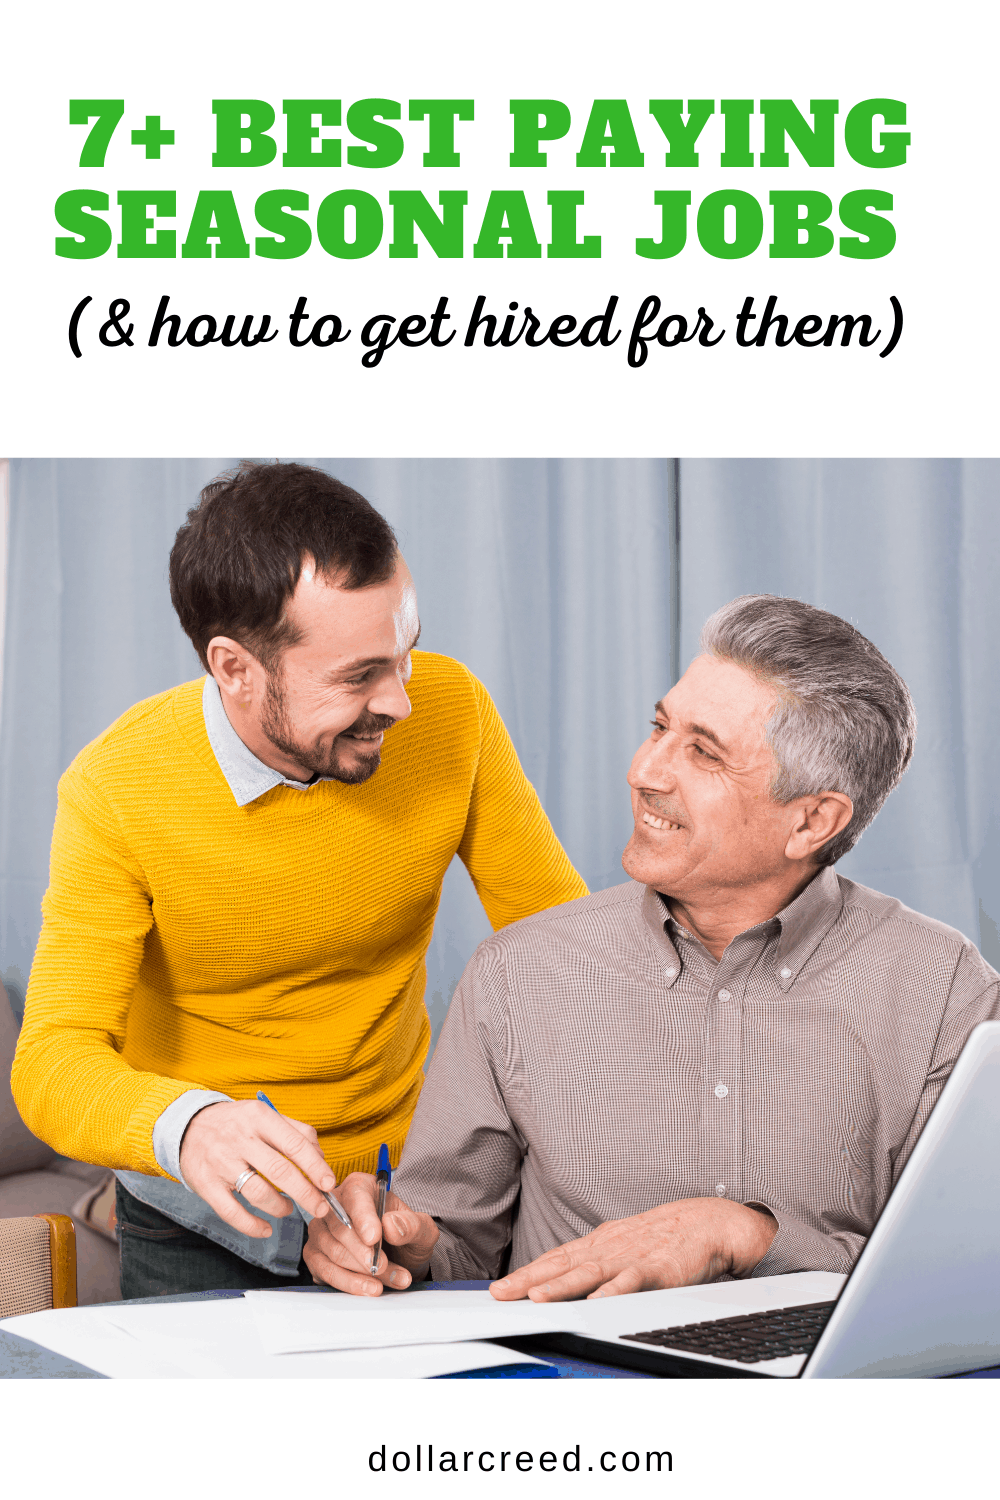 7+ Best Paying Seasonal jobs (& how to get hired for them) DollarCreed